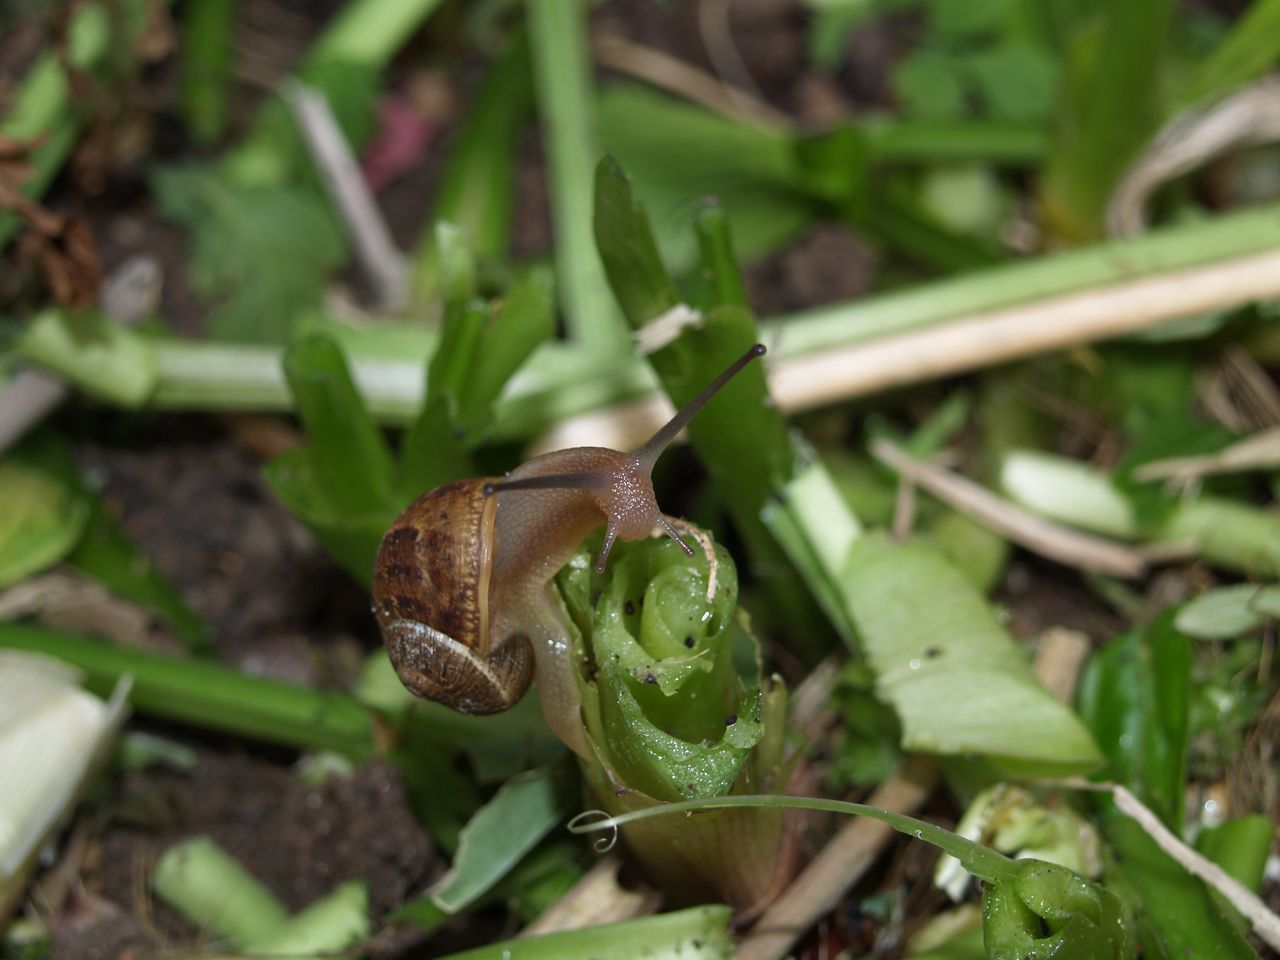 CLOSE-UP OF SNAILS ON PLANT